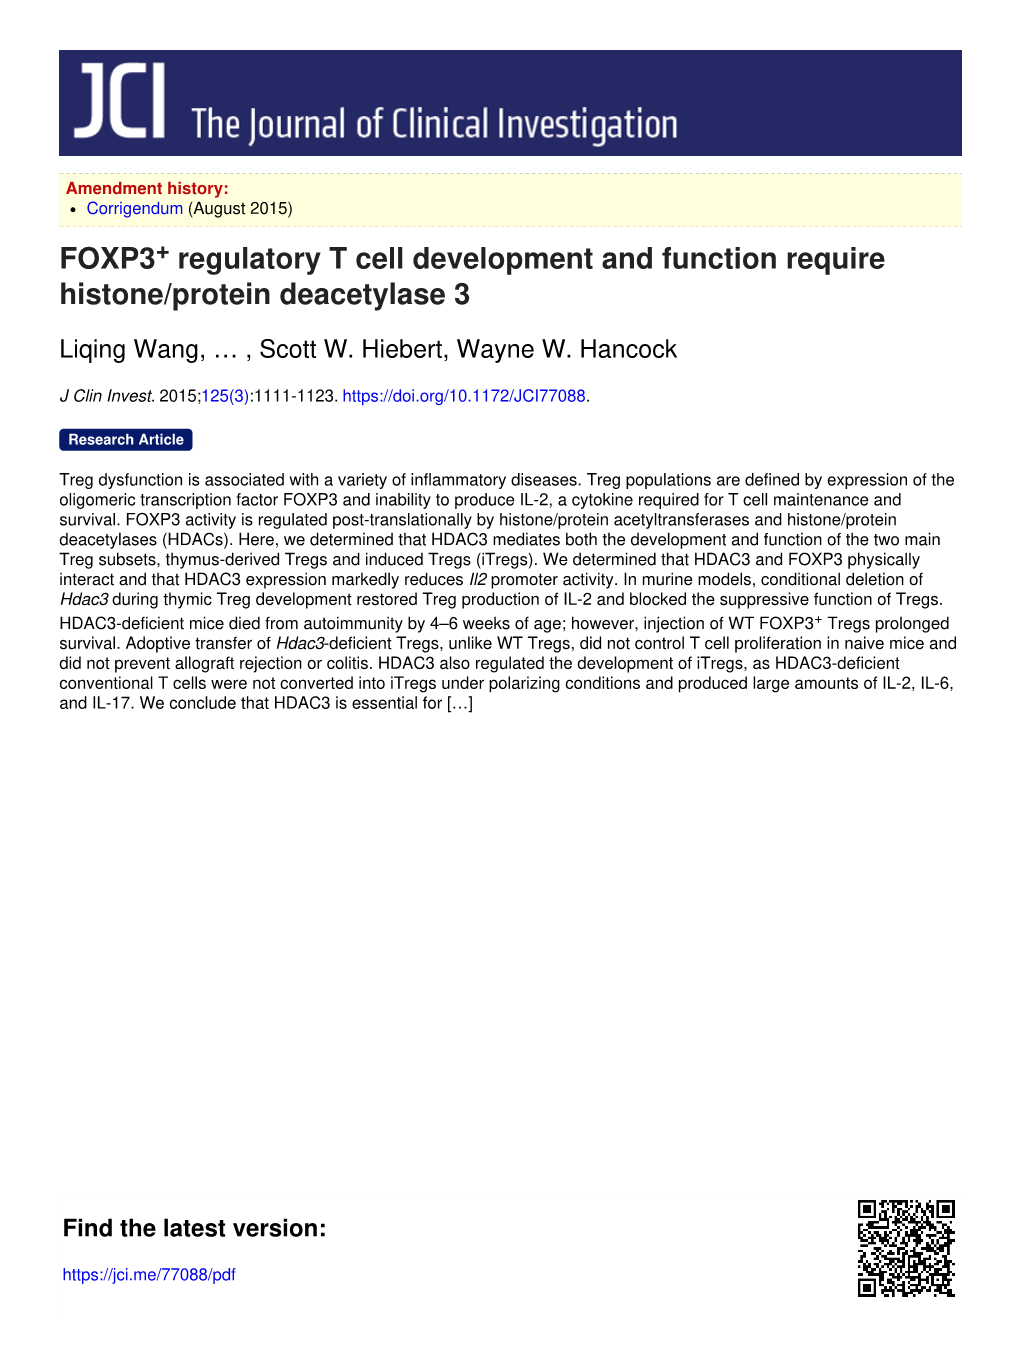 FOXP3+ Regulatory T Cell Development and Function Require Histone/Protein Deacetylase 3